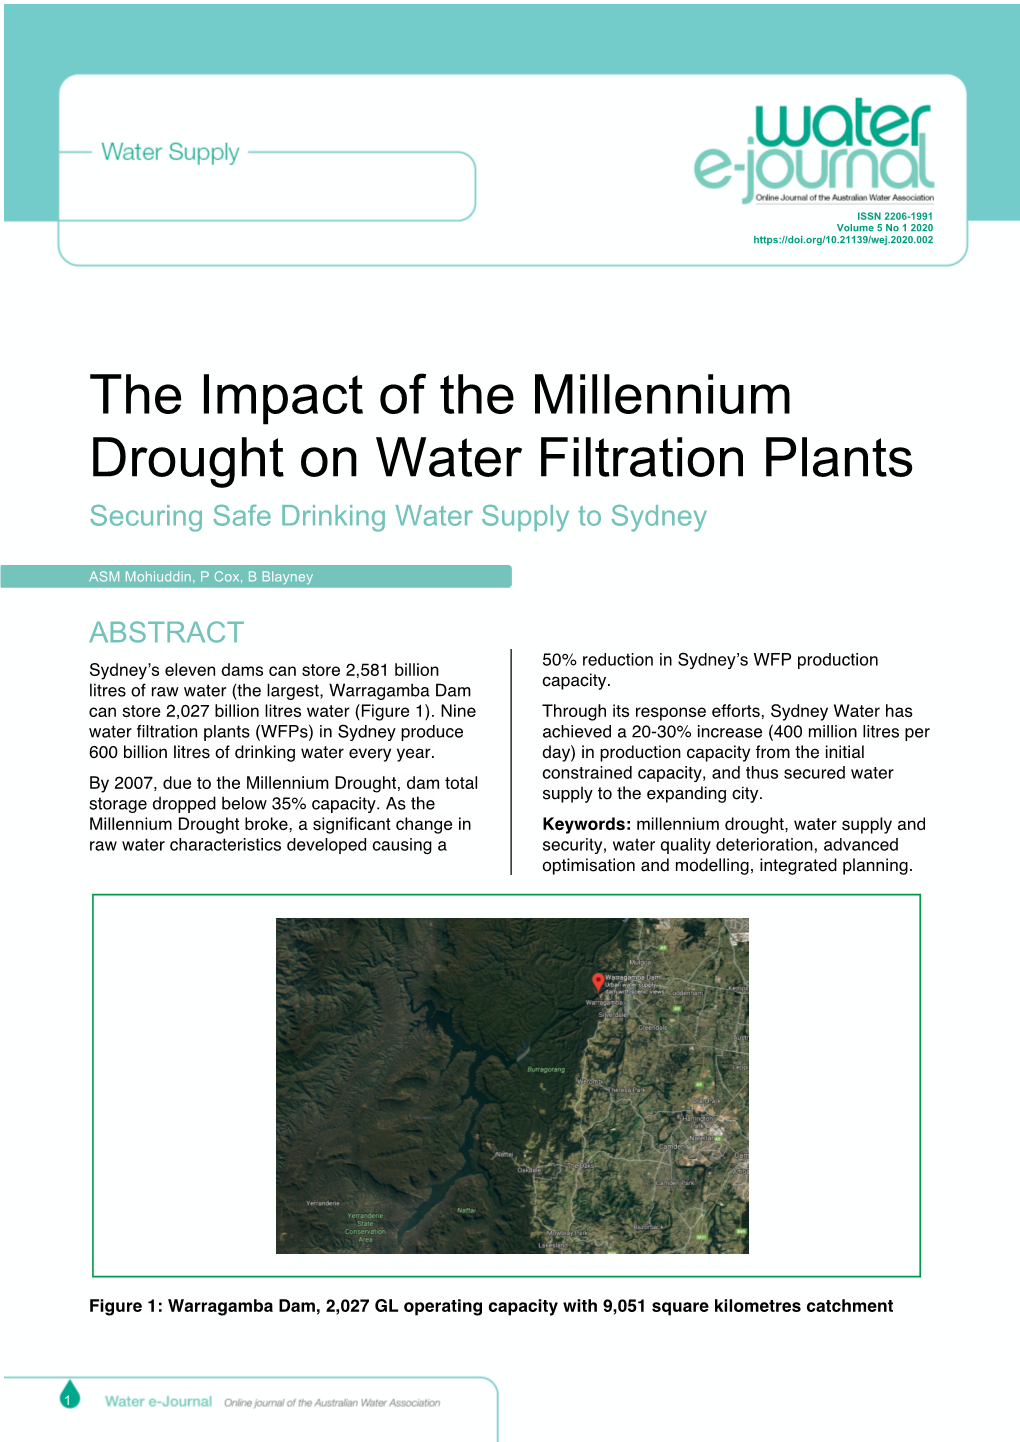 The Impact of the Millennium Drought on Water Filtration Plants Securing Safe Drinking Water Supply to Sydney